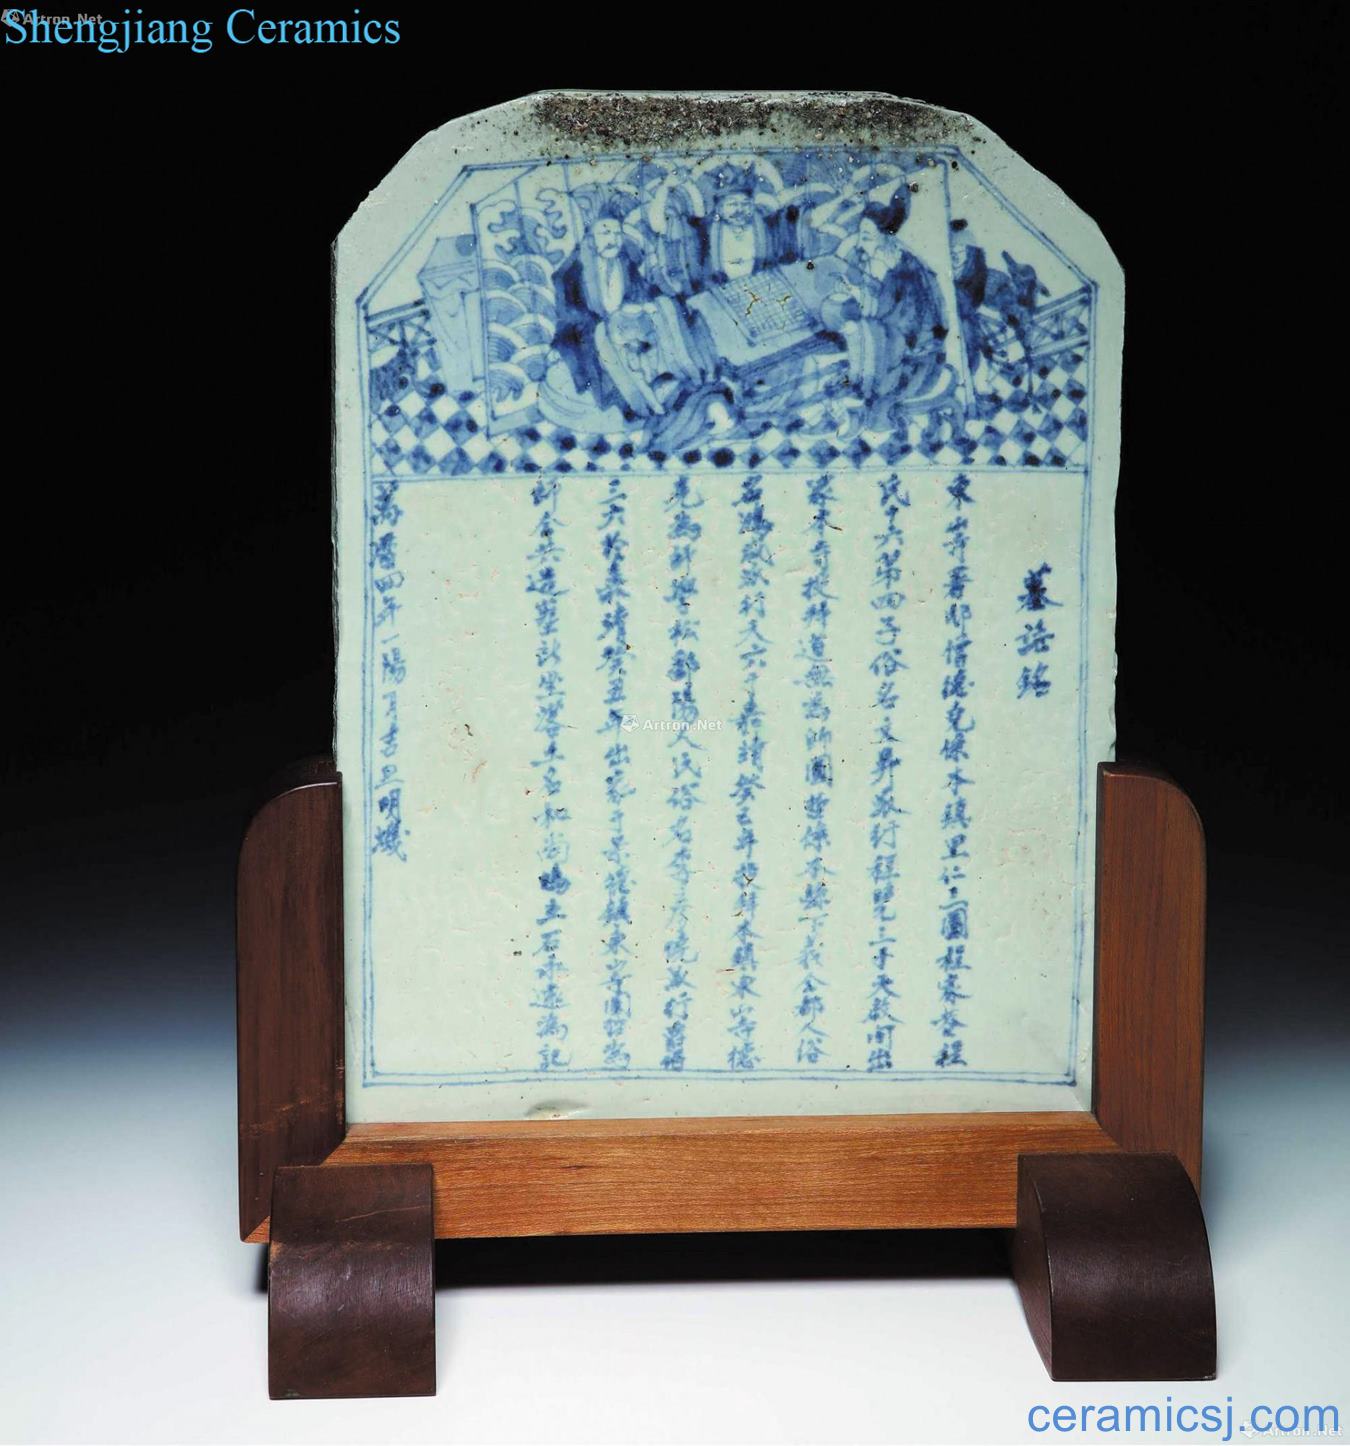 Four years of wanli "poetic" officer implement epitaph ceramic plate